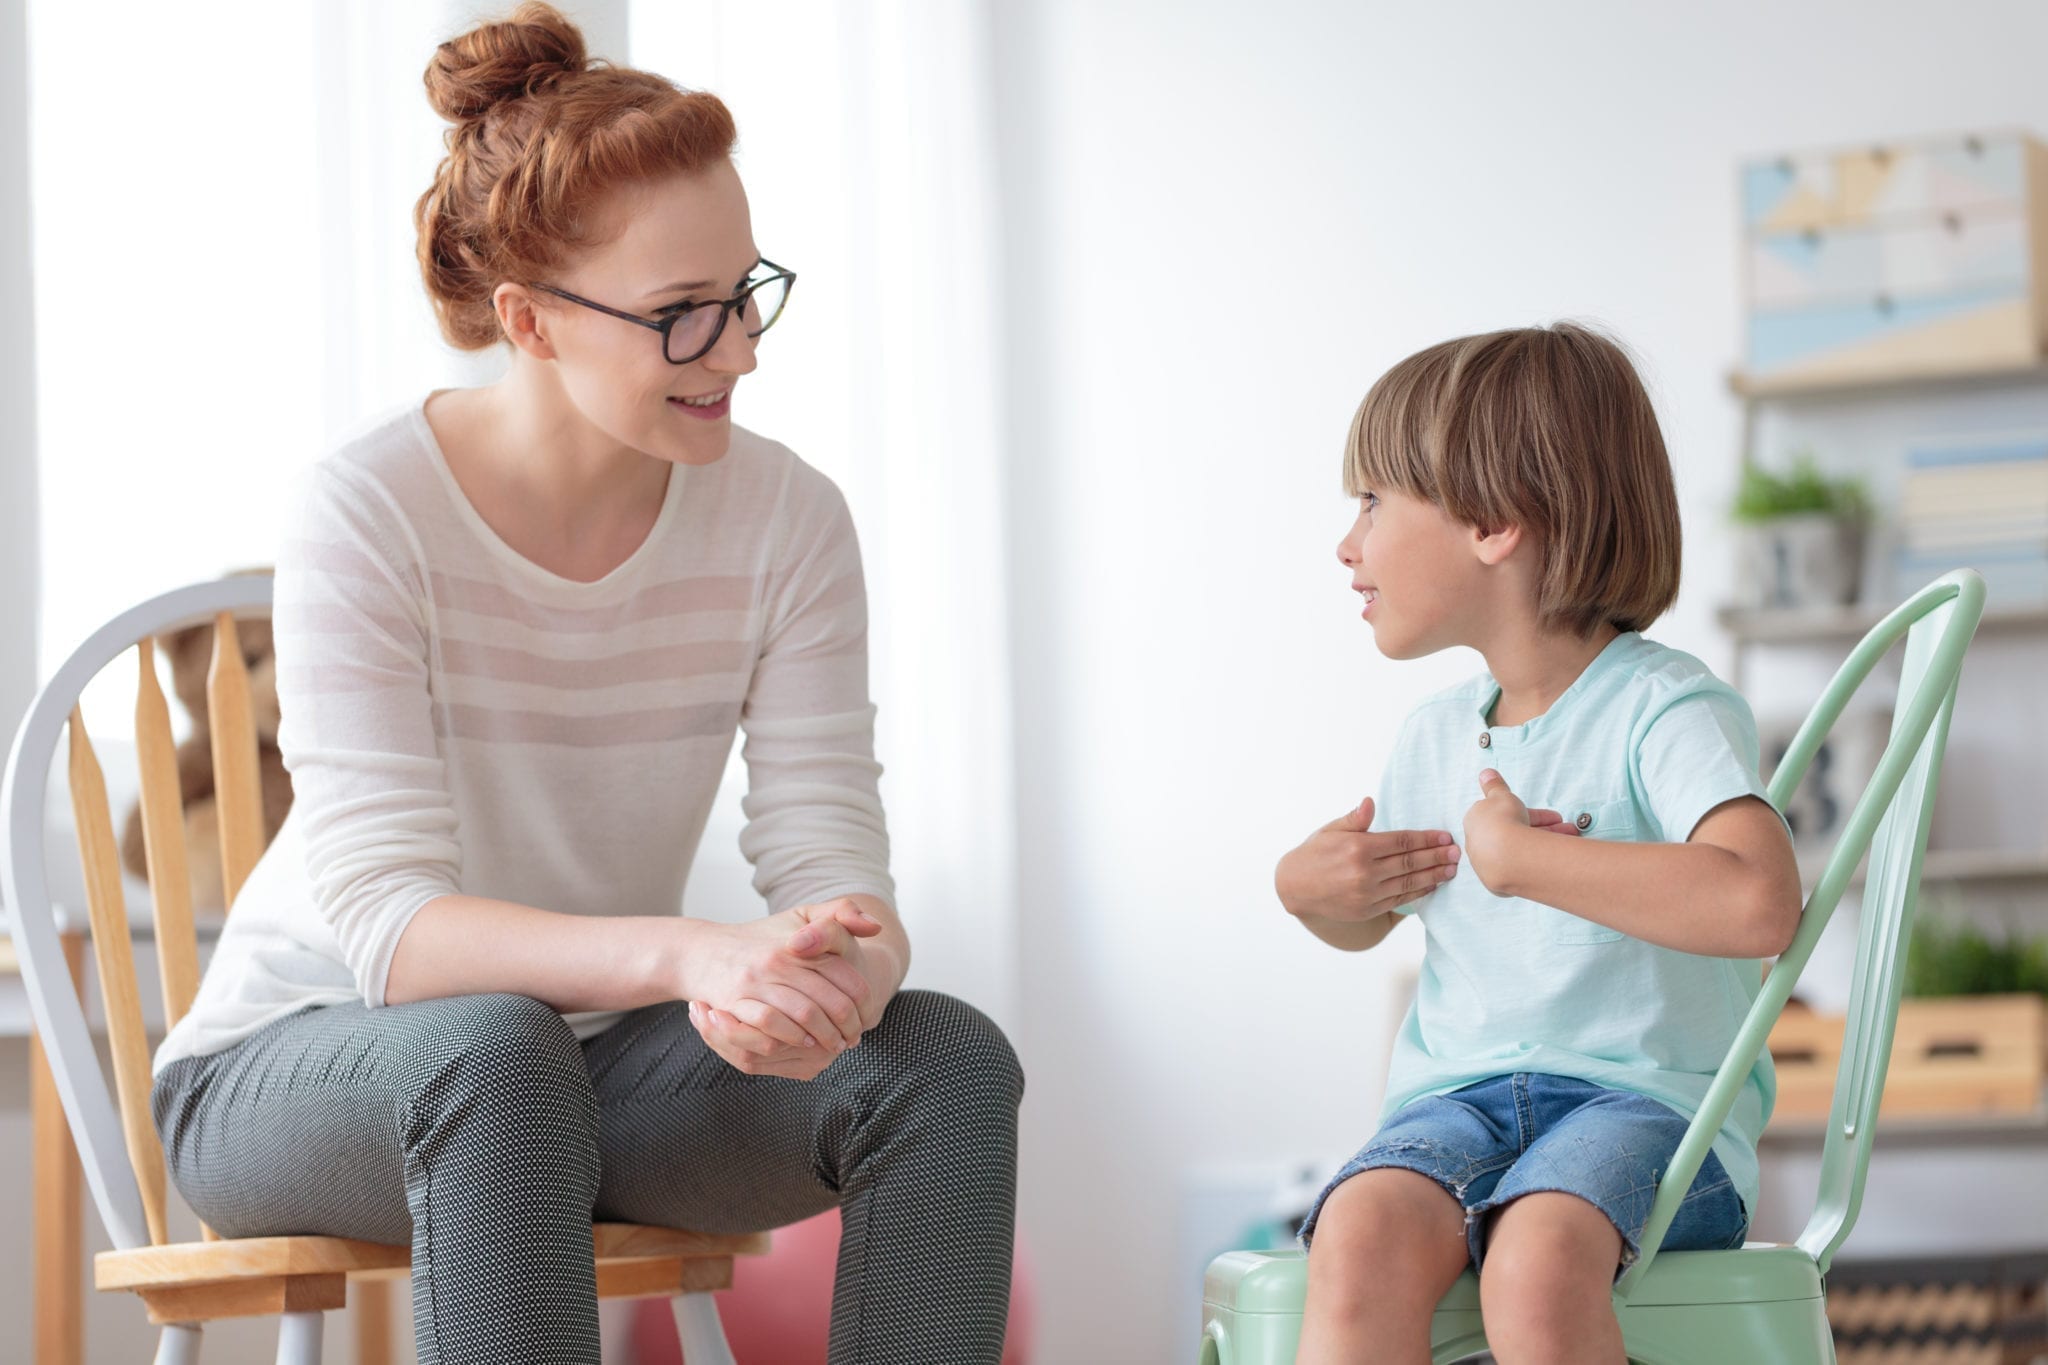 Image of a woman sitting down speaking to a young boy.